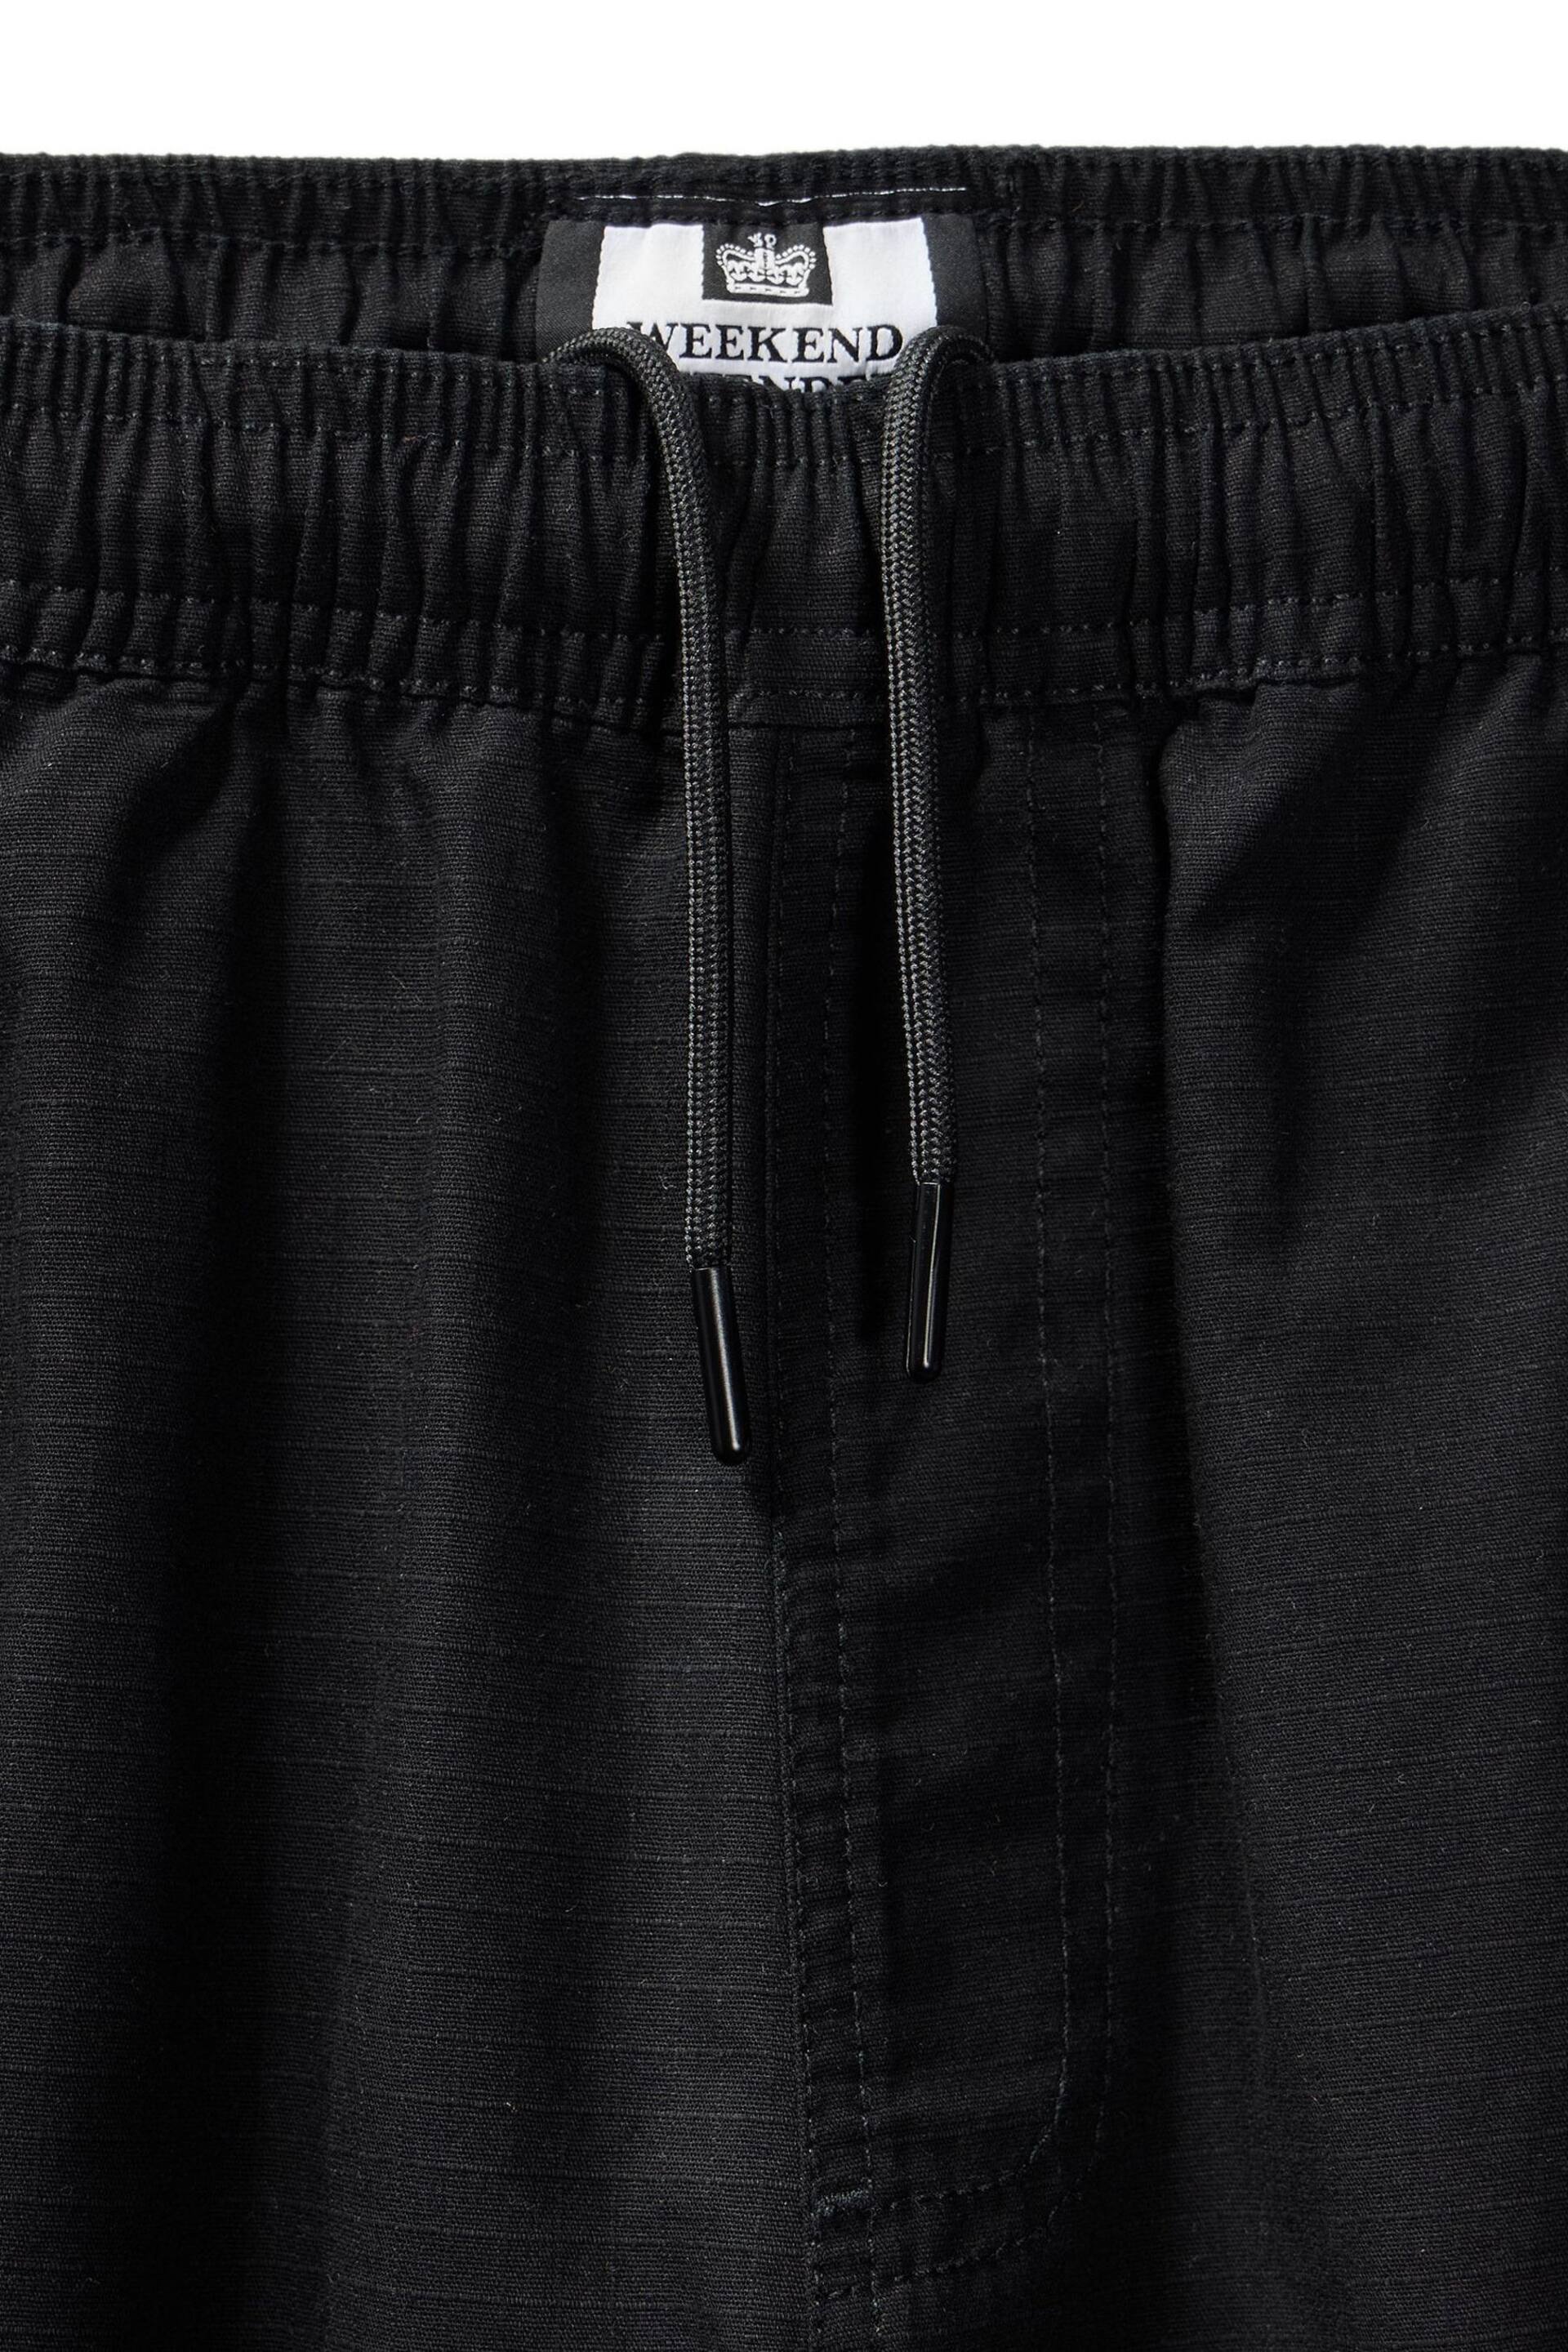 Weekend Offender Pianamo Cargo Trousers - Image 5 of 7